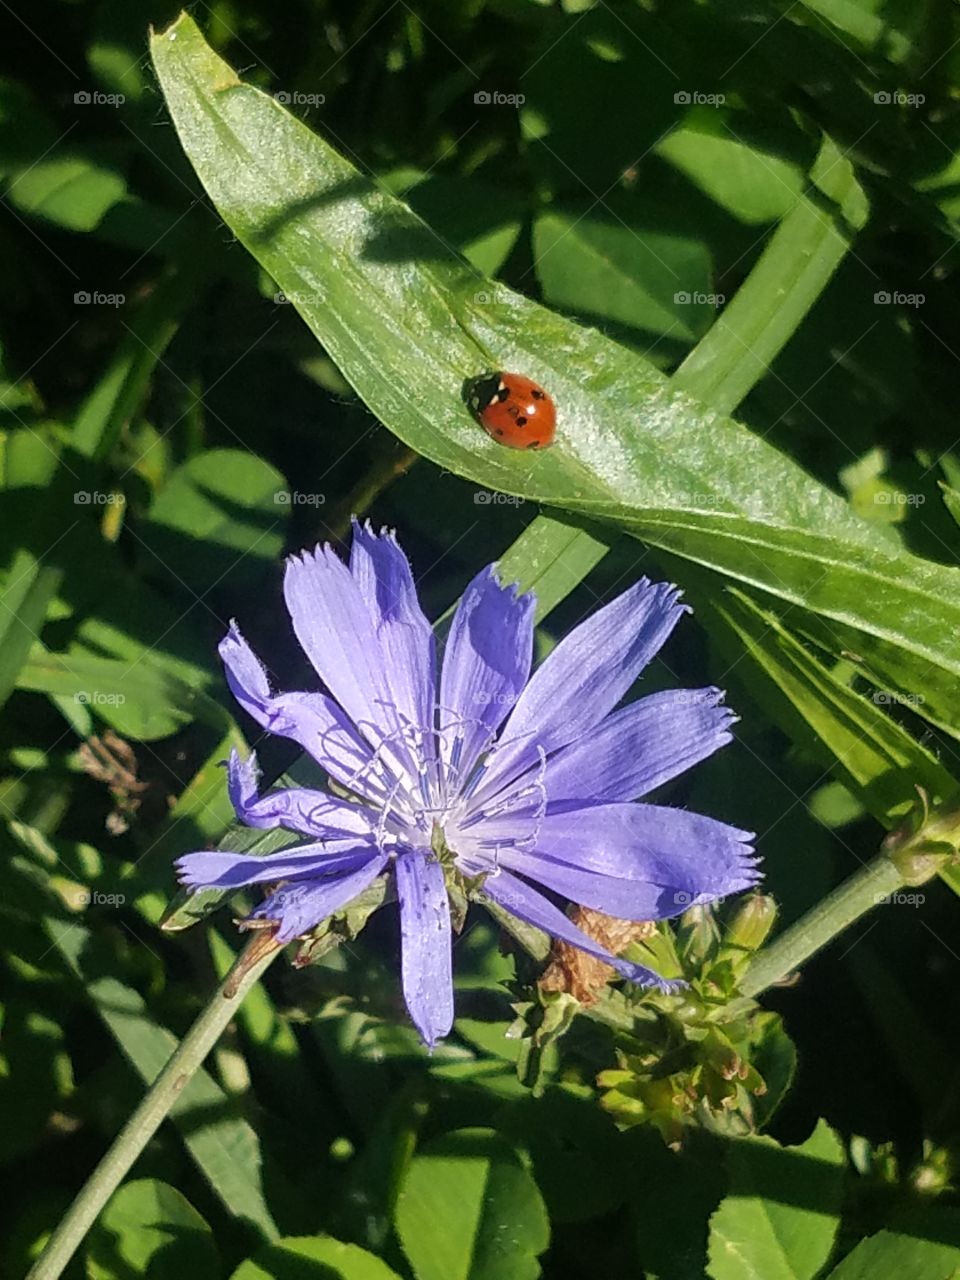 ladybug on a blade of grass next to a flower